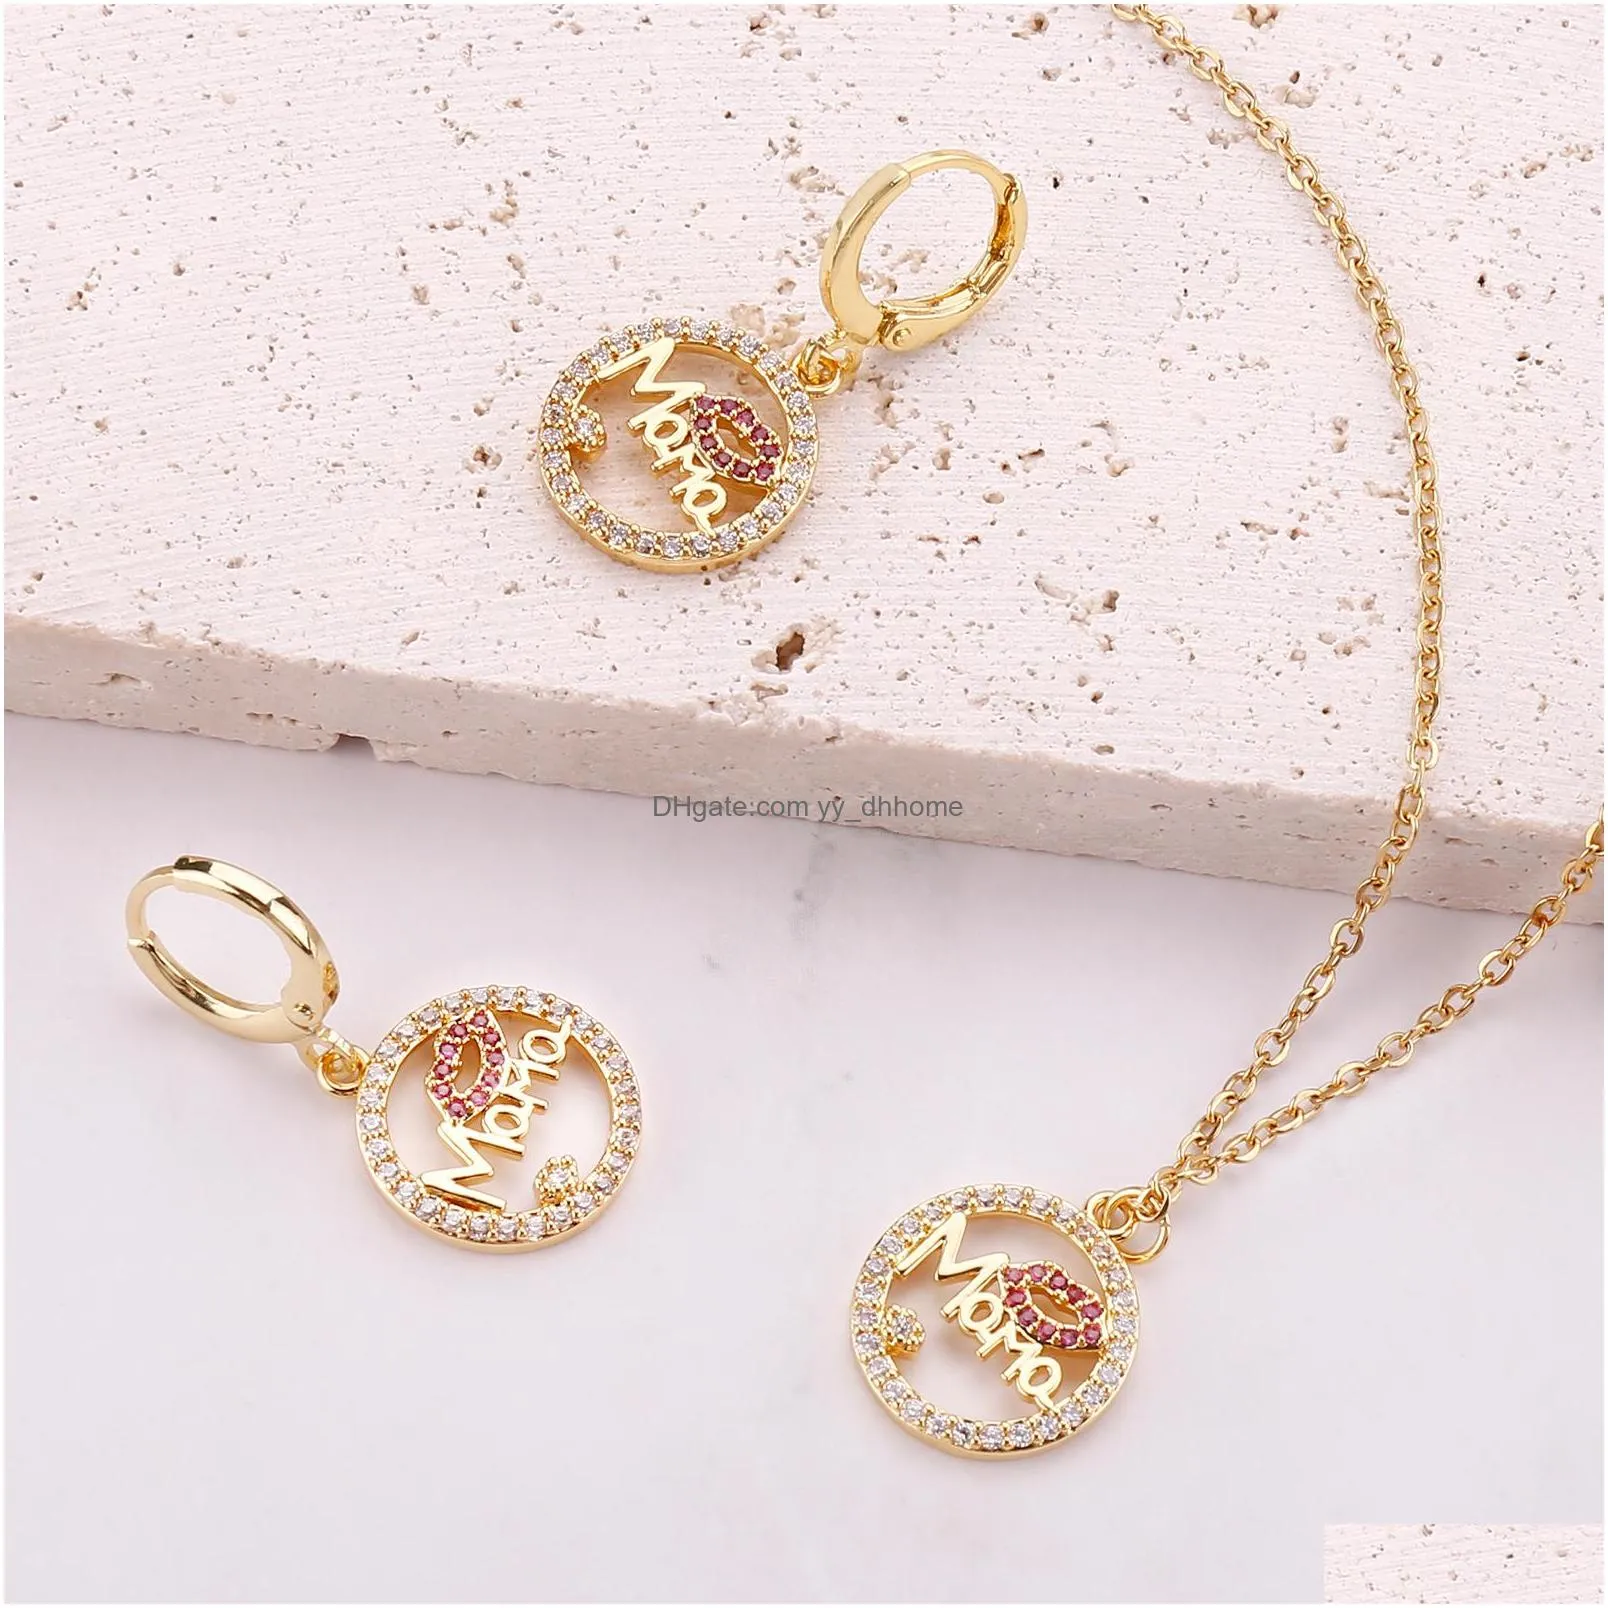  arrival tiny heart necklace for women rose gold chain pendant necklace cute girl bohemia party choker jewelry gifts